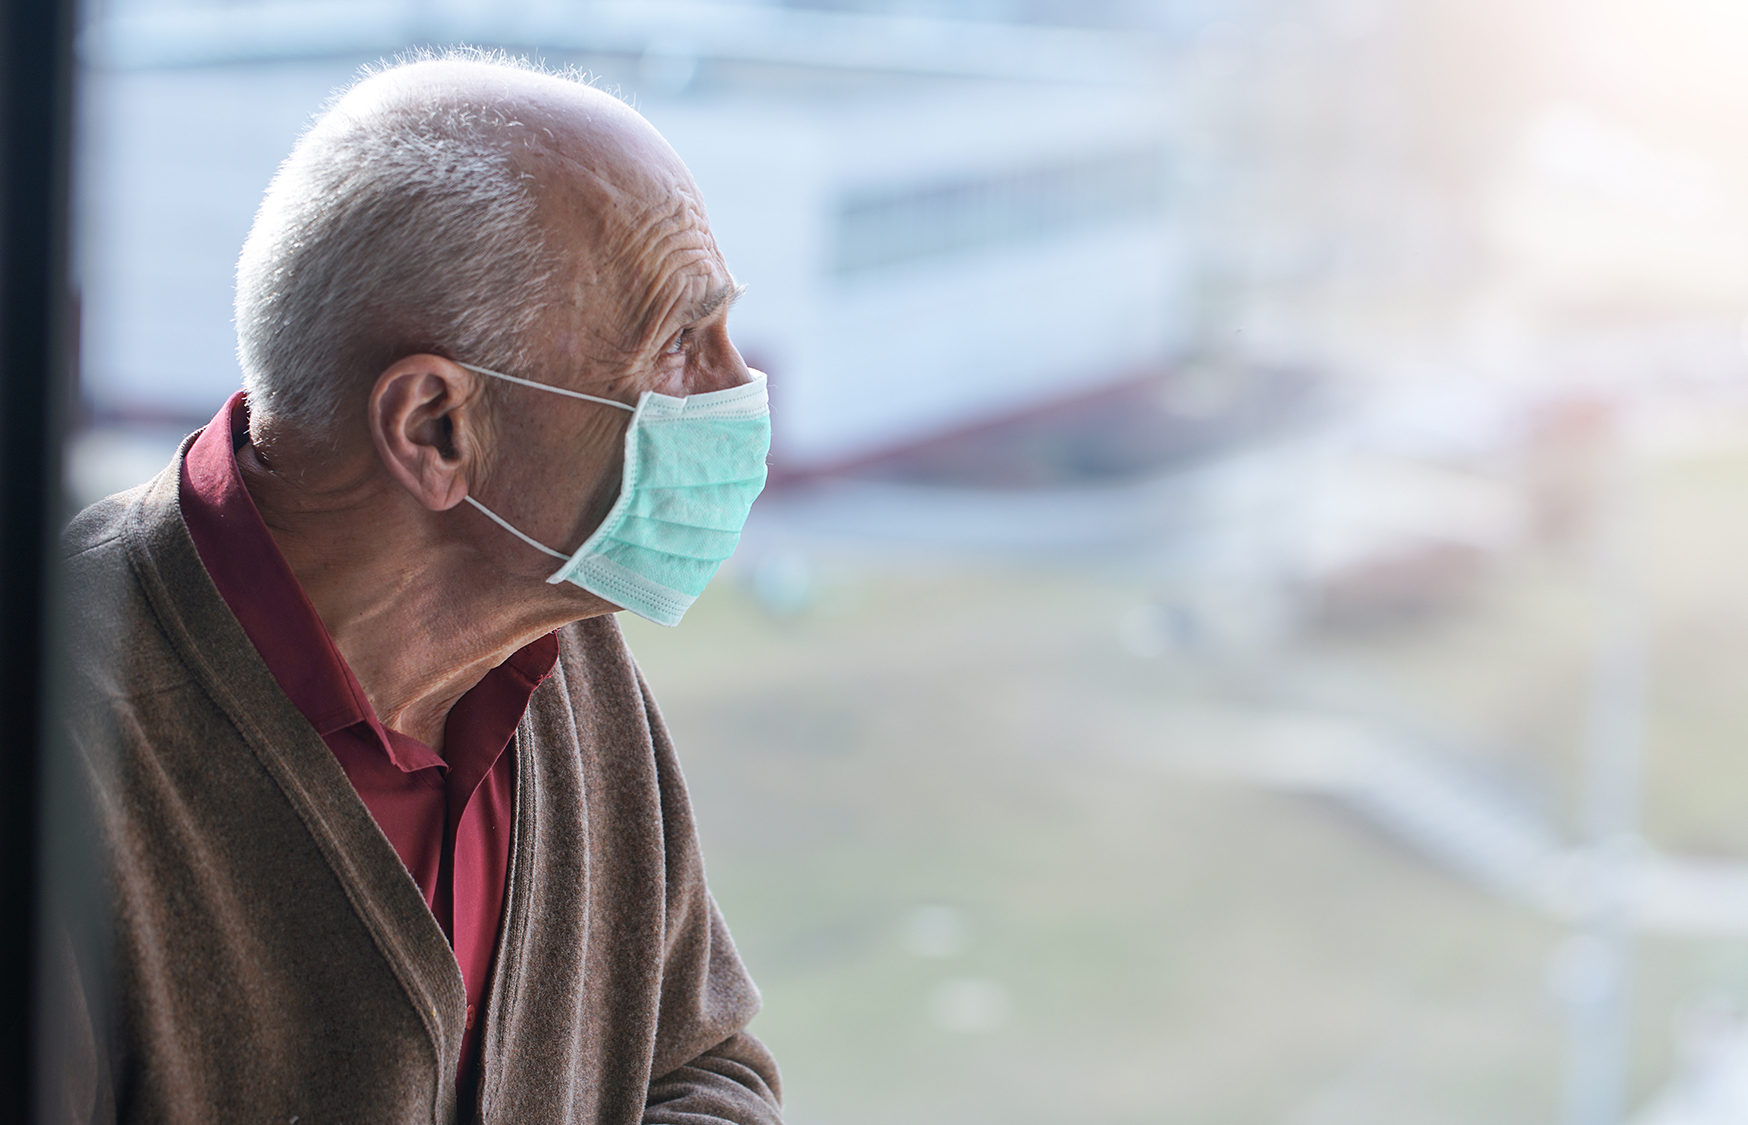 Elderly person sitting alone wearing a face mask.